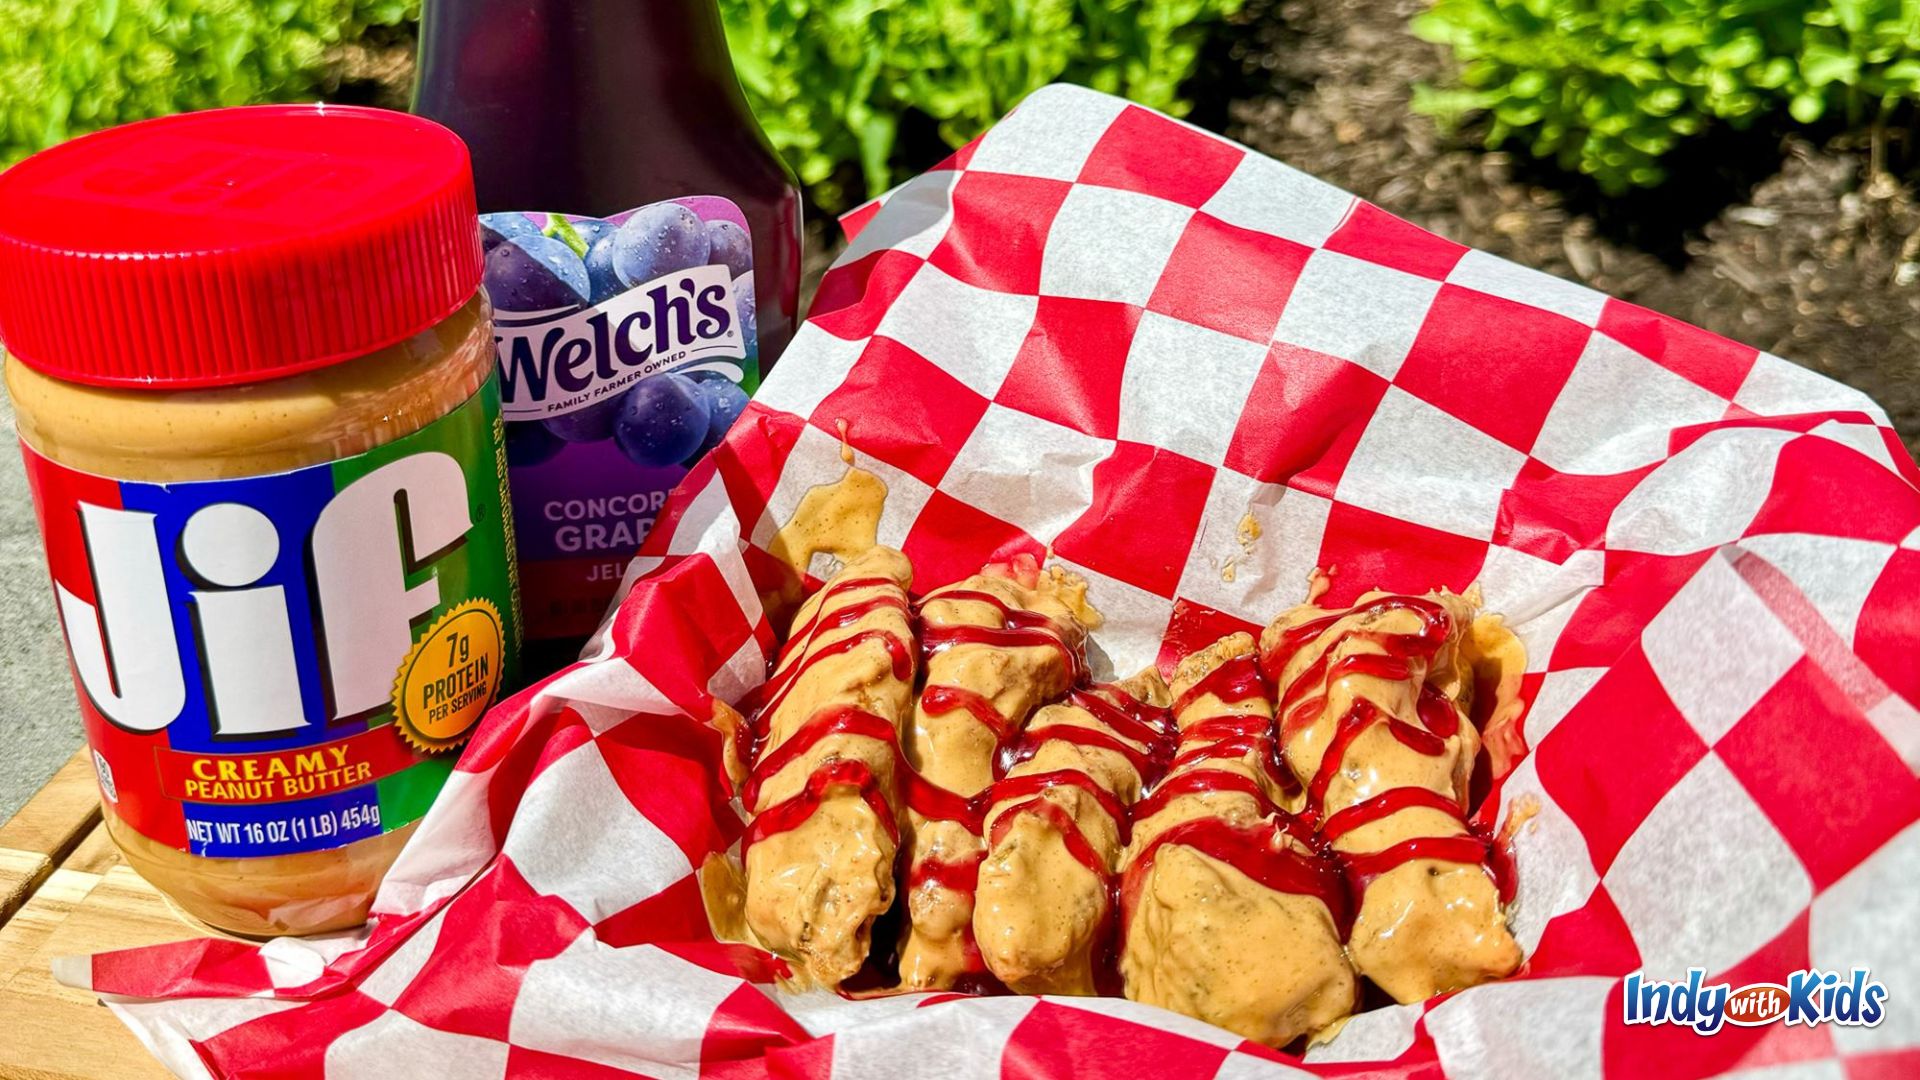 Indiana State Fair Food: A basket of chicken wings is lined with red and white checkered paper. The wings are covered in peanut butter and jelly and the containers for these condiments sit alongside the basket.